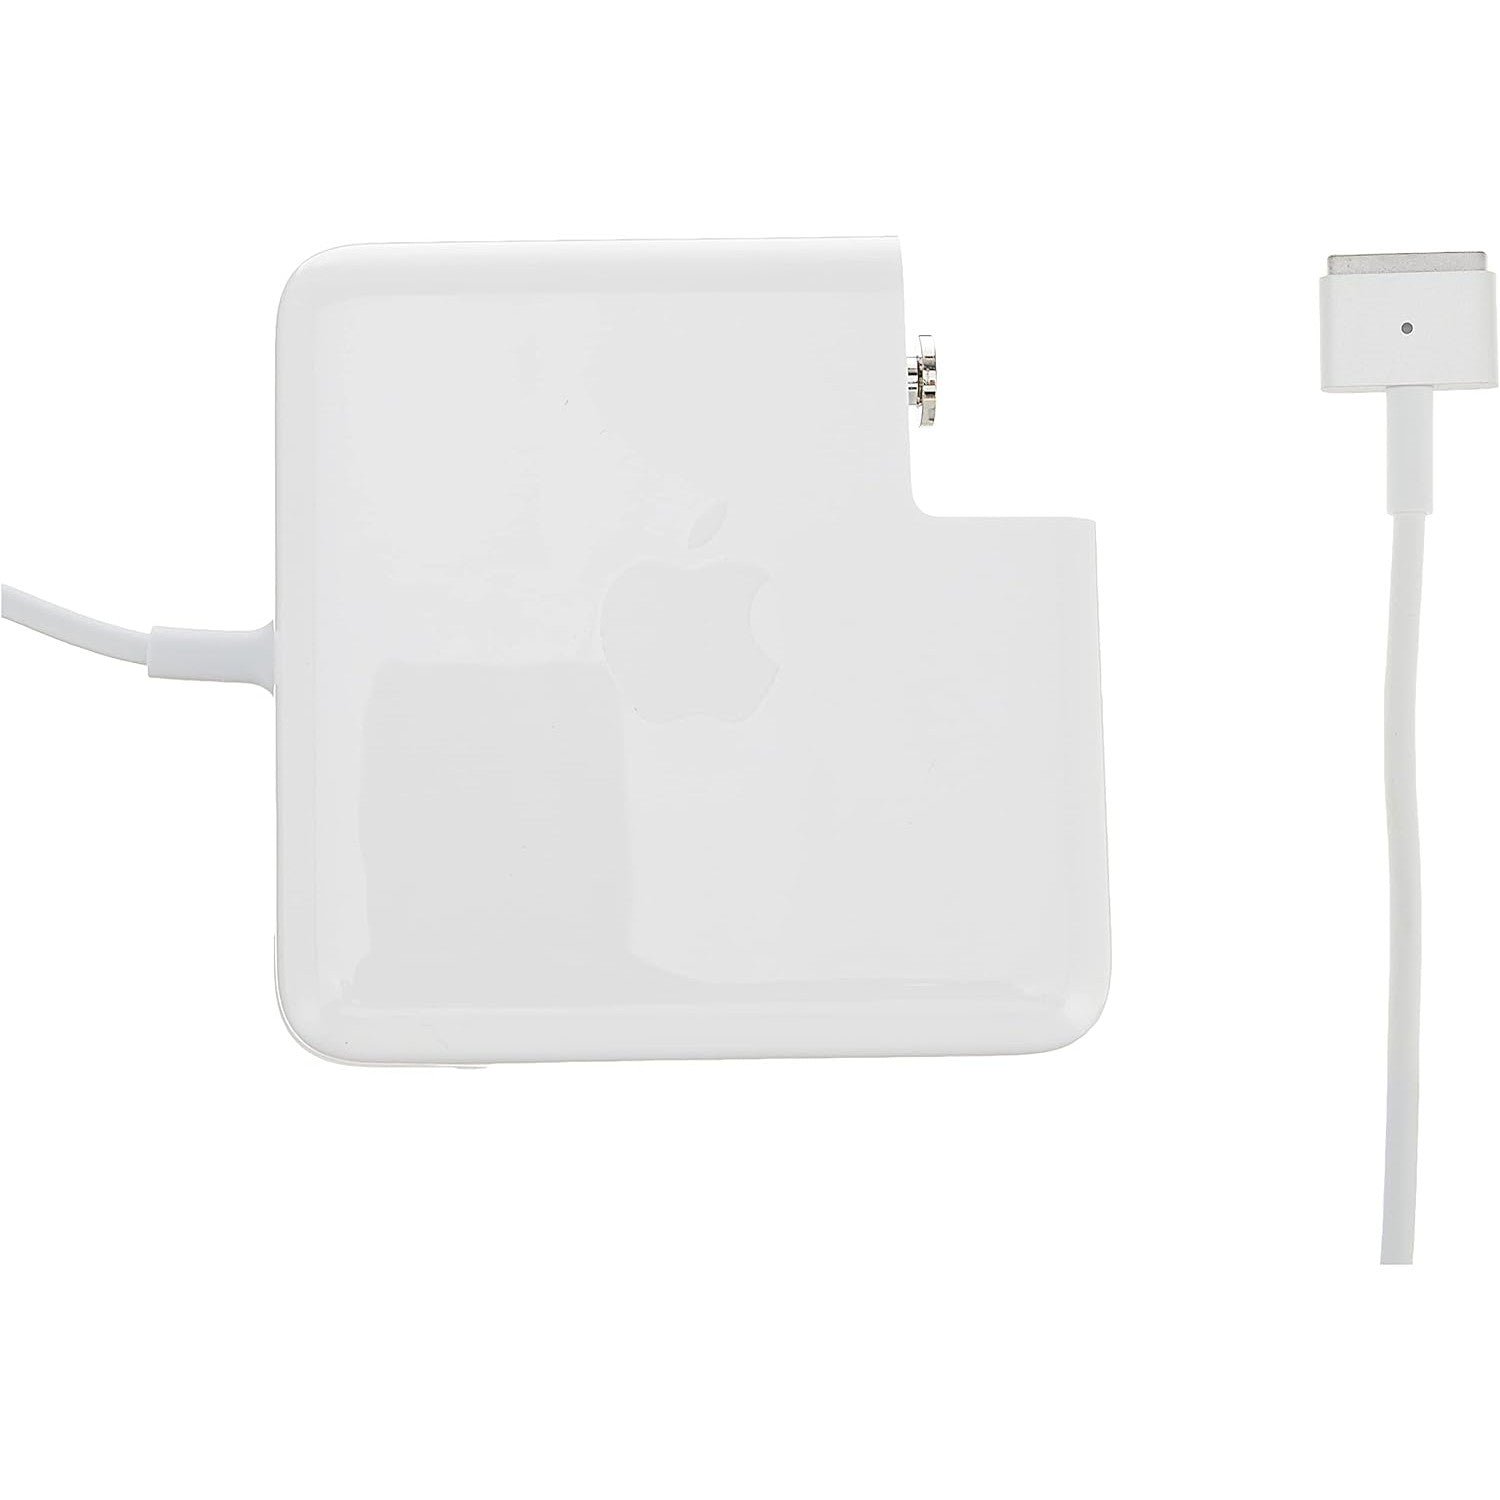 Apple 85W MagSafe 2 Power Adapter for MacBook Pro MD506B/B - New